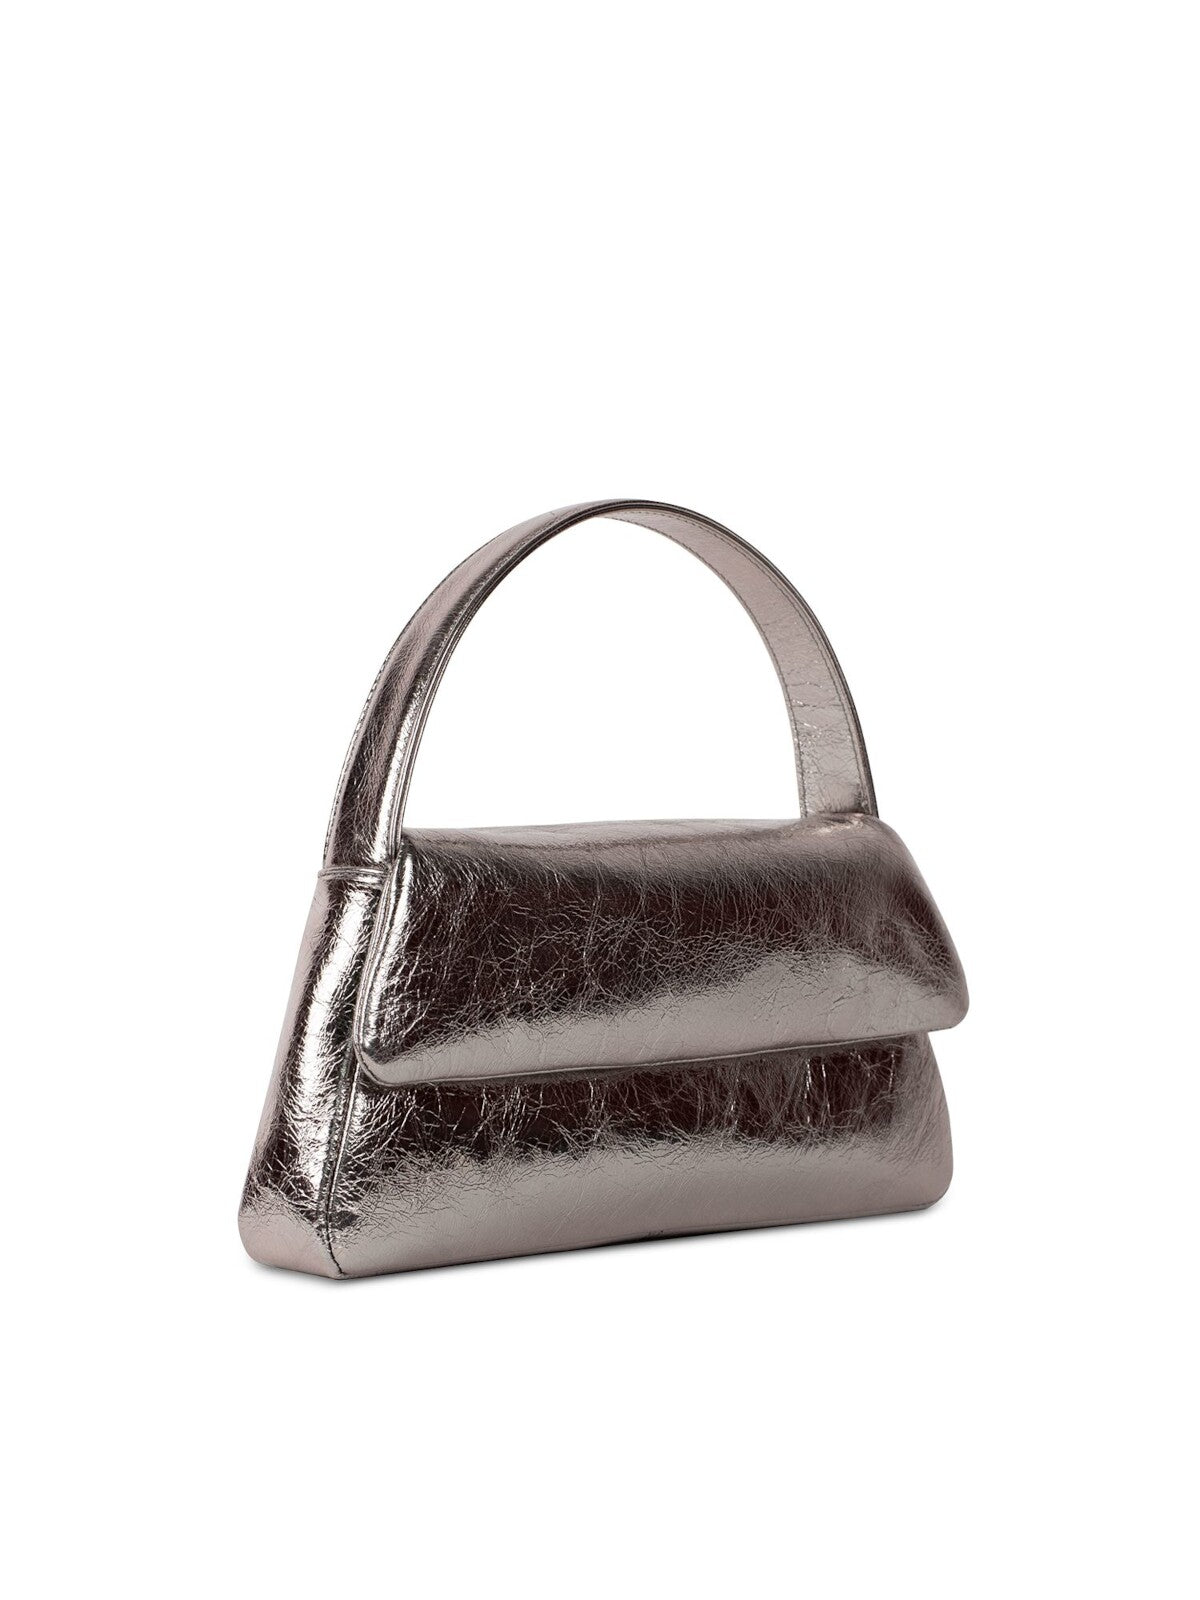 LISELLE KISS Women's Silver Metallic Solid Leather Puffed Design Single Strap Shoulder Bag